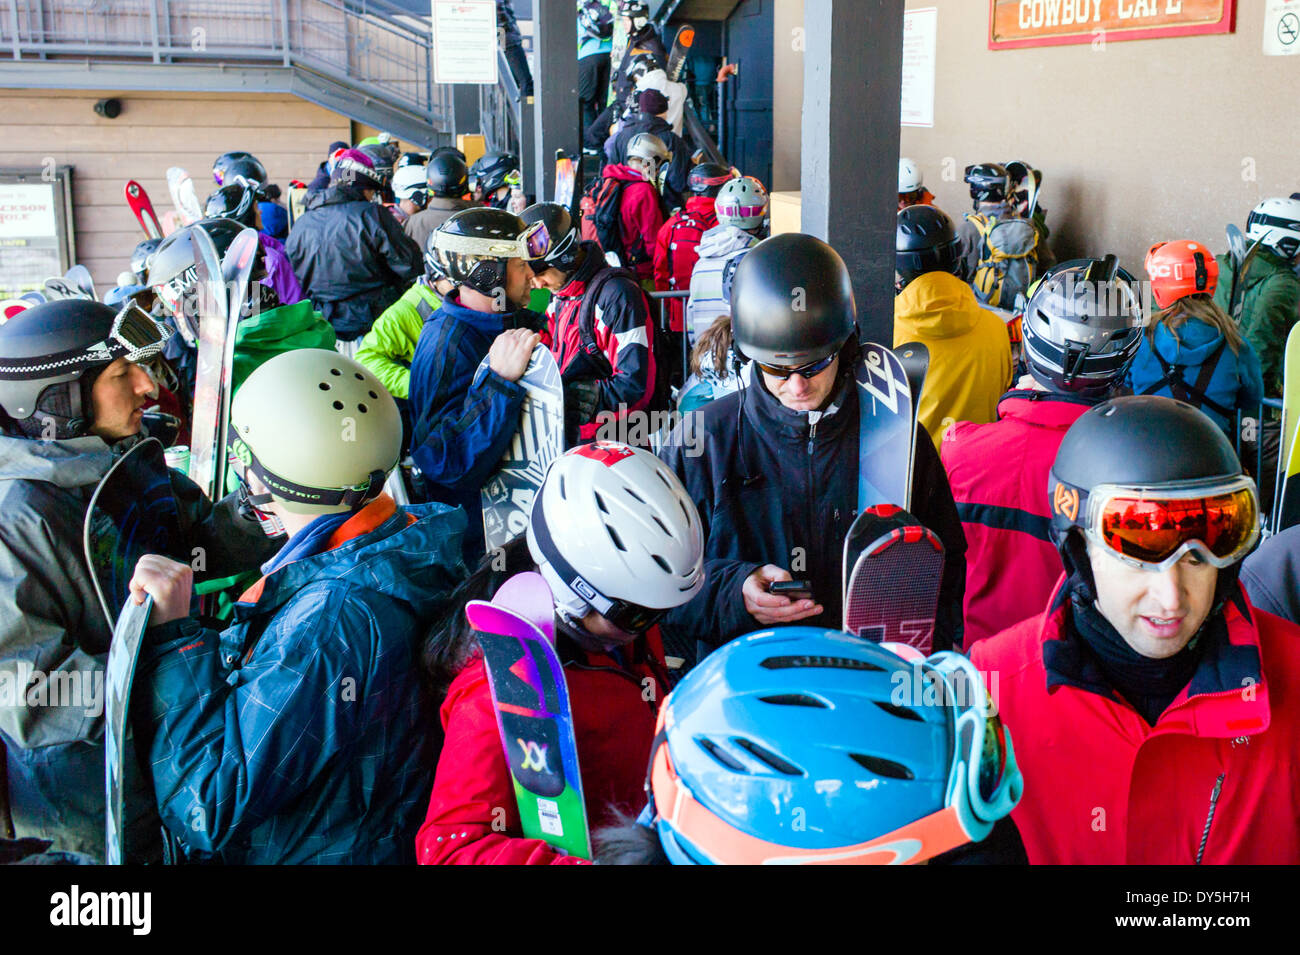 Skiers wait in line for the tram ride, Jackson Hole Mountain Resort, Jackson, Wyoming, USA Stock Photo